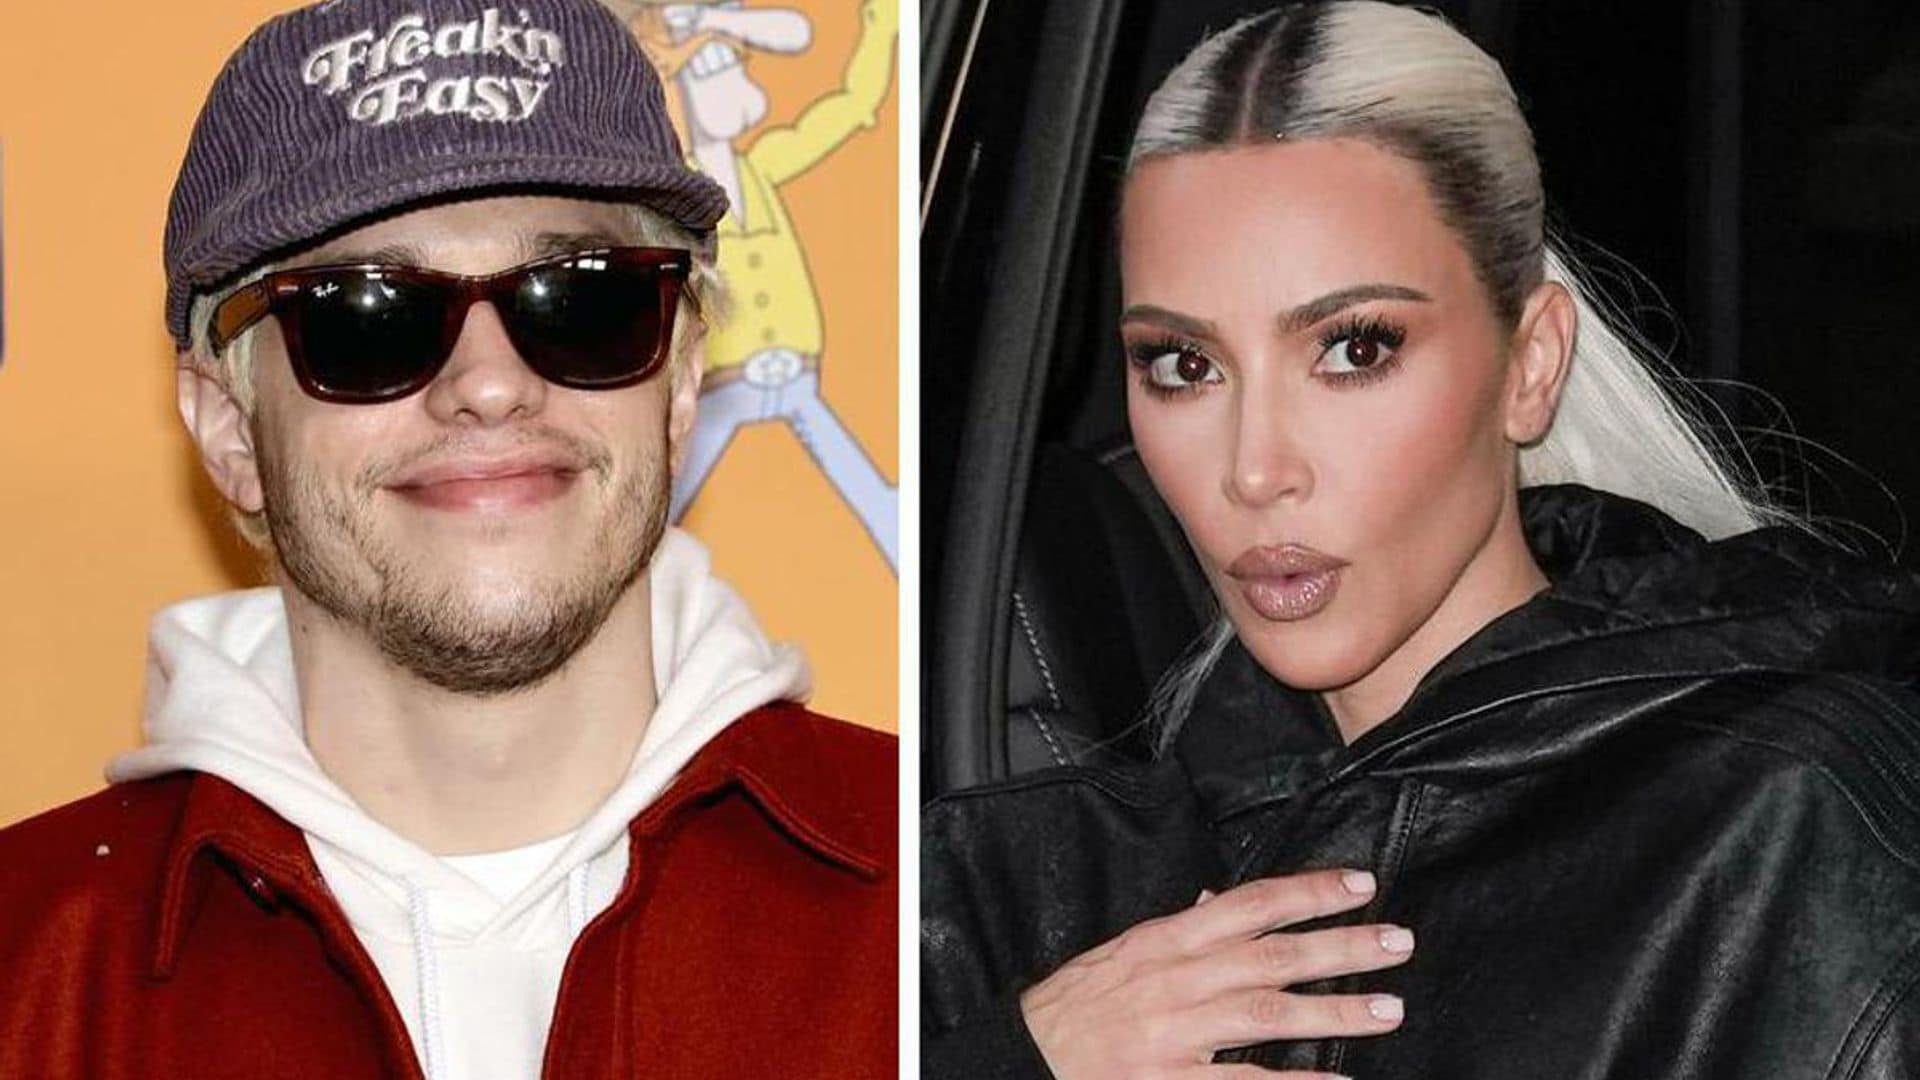 Don’t get too excited, Kim Kardashian’s ex Pete Davidson will barely appear in ‘The Kardashians’